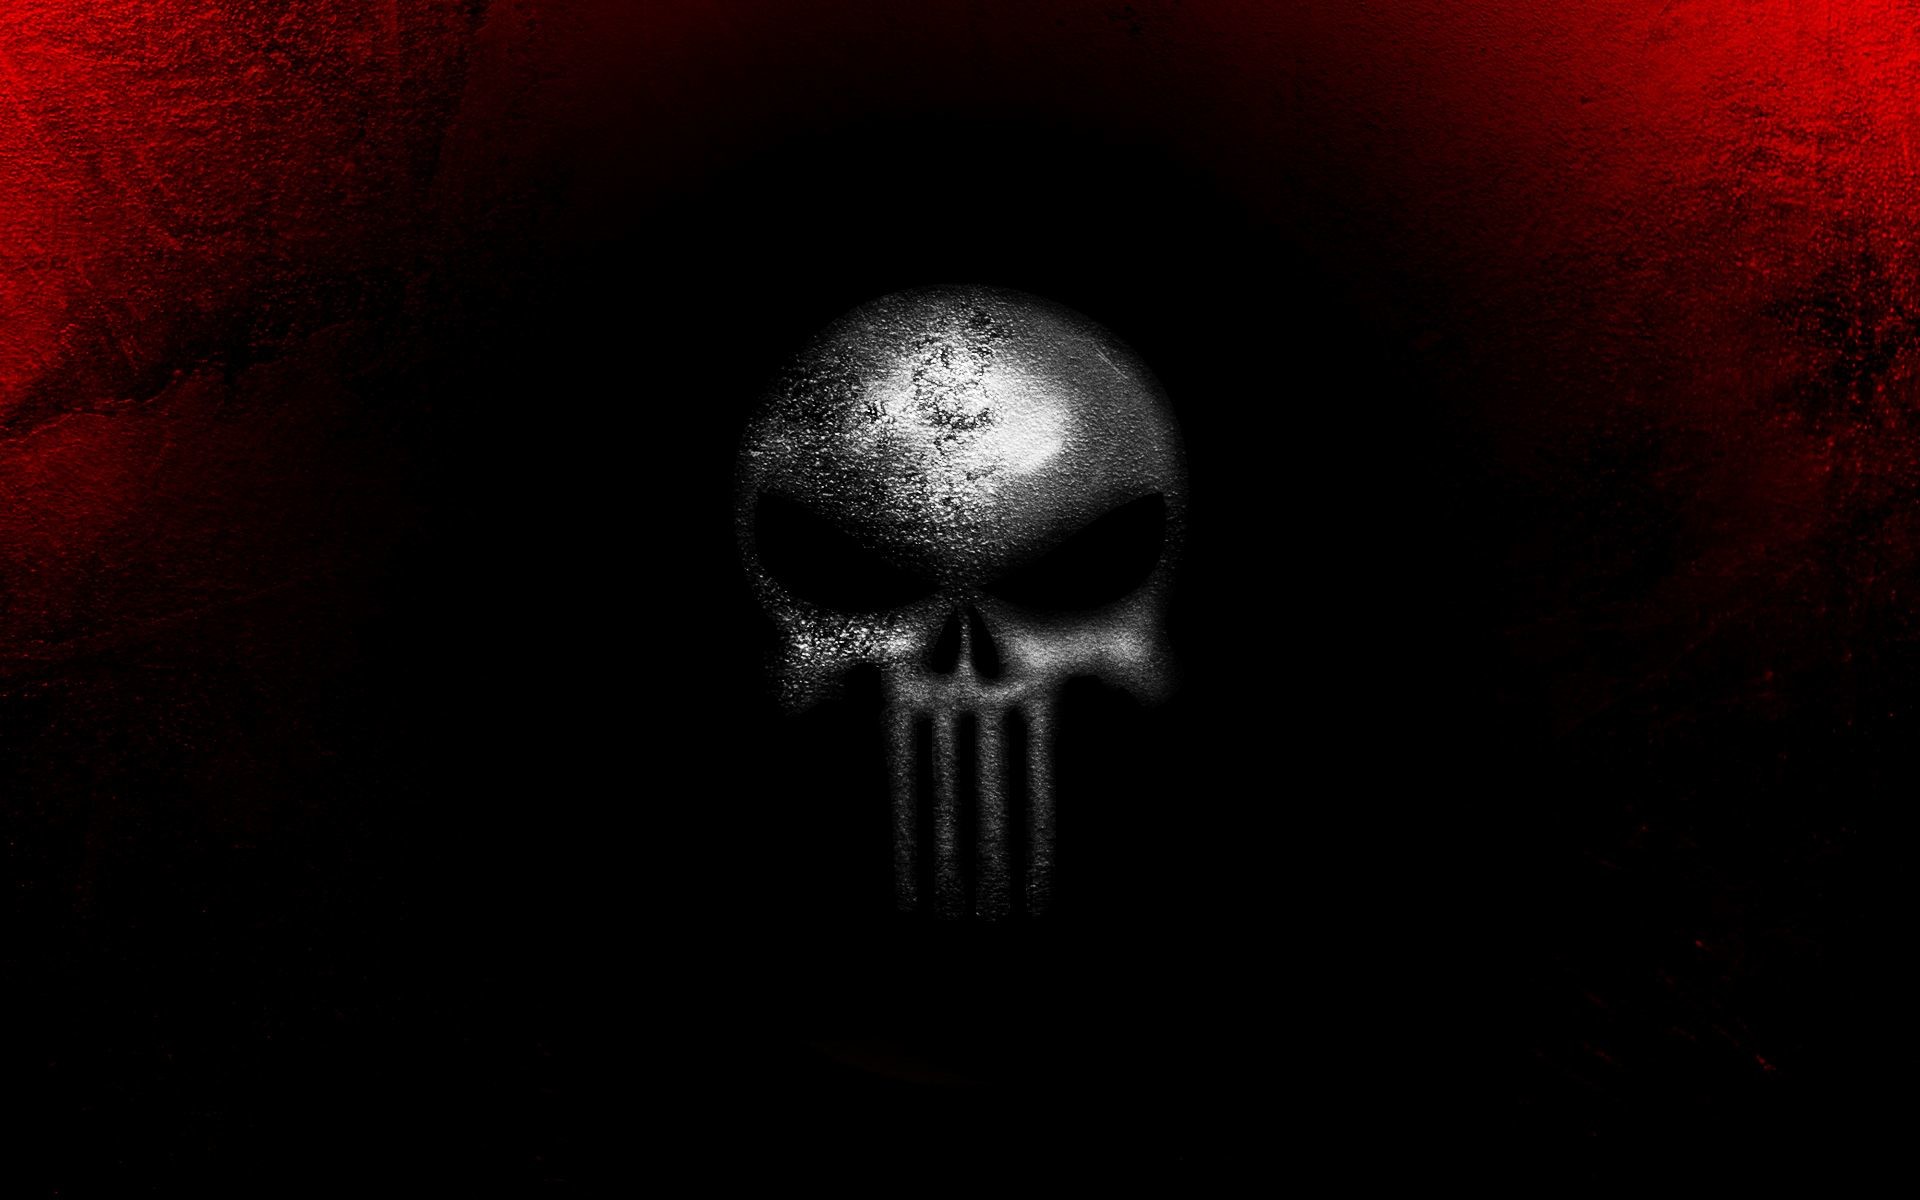 The Punisher Wallpapers Wallpaper HD Wallpapers Pinterest Punisher and Wallpaper